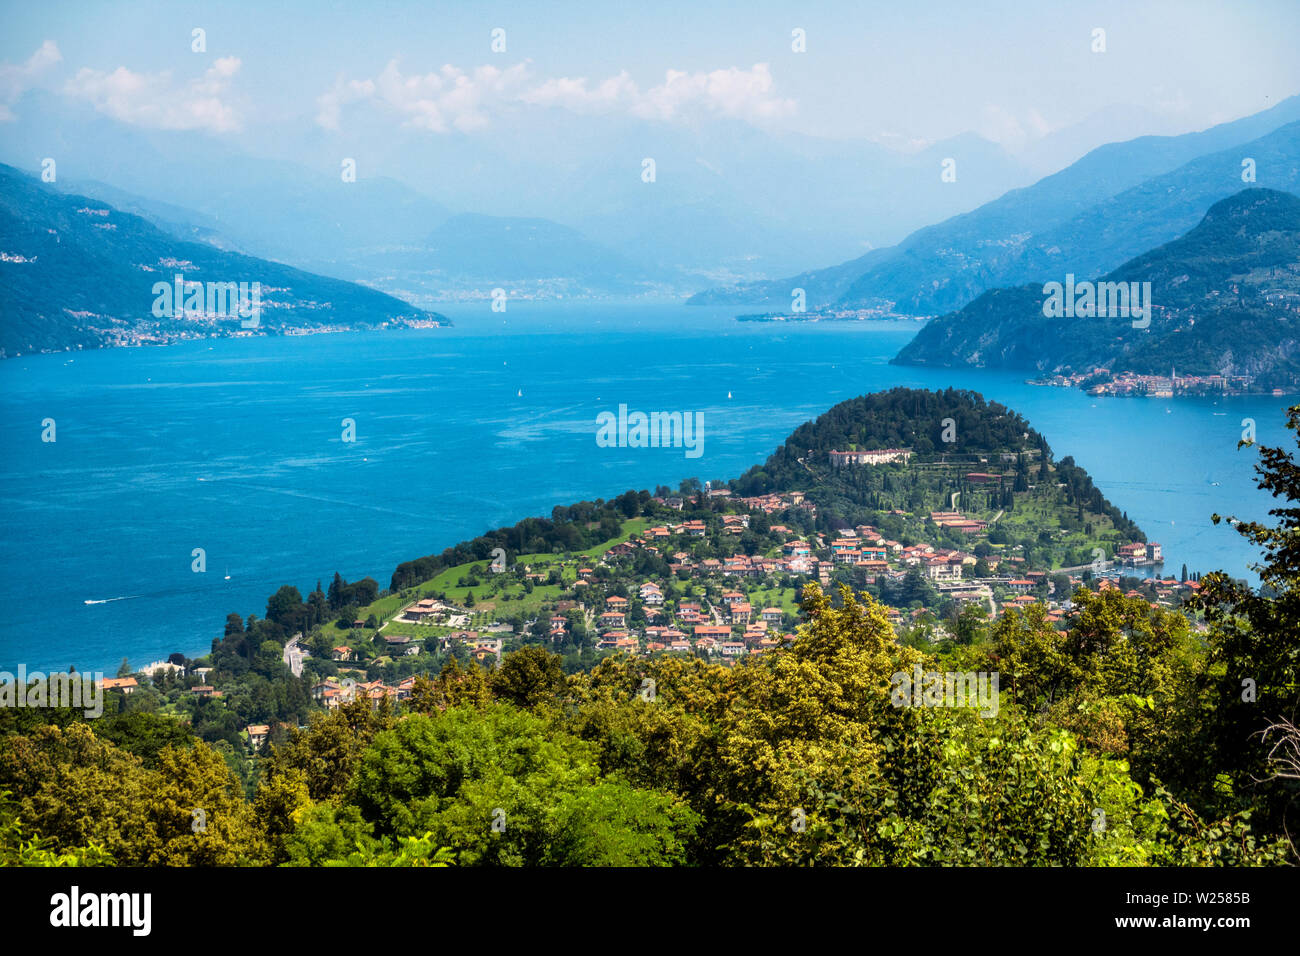 Como lake and Bellagio from above, view from Madonna del Ghisallo, Lecco, Italy. Stock Photo